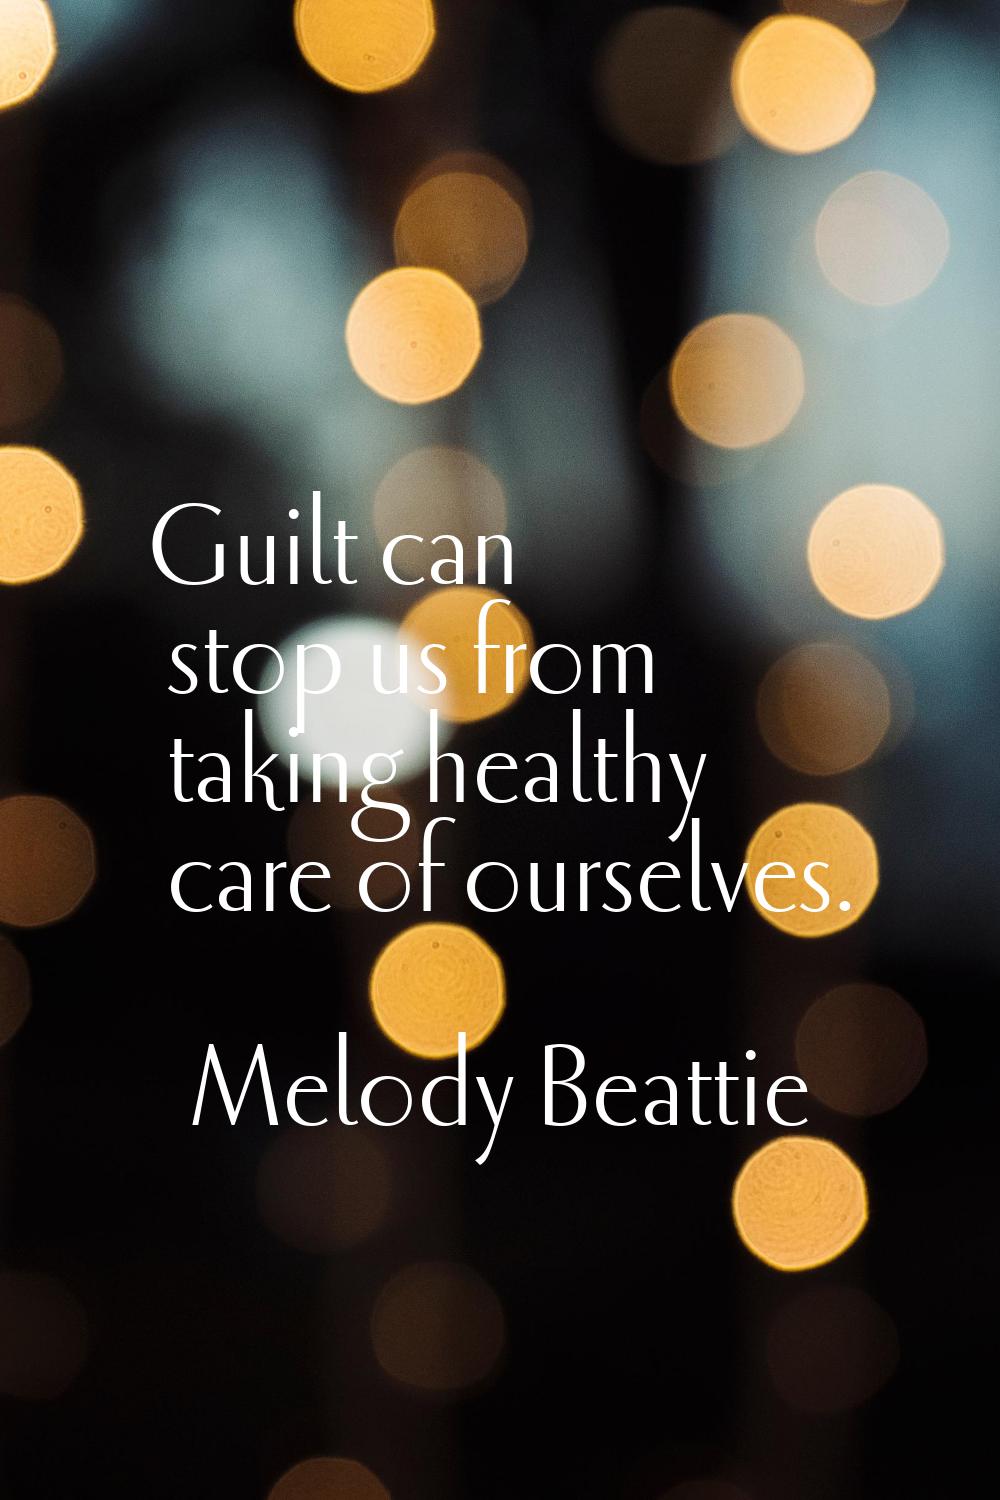 Guilt can stop us from taking healthy care of ourselves.